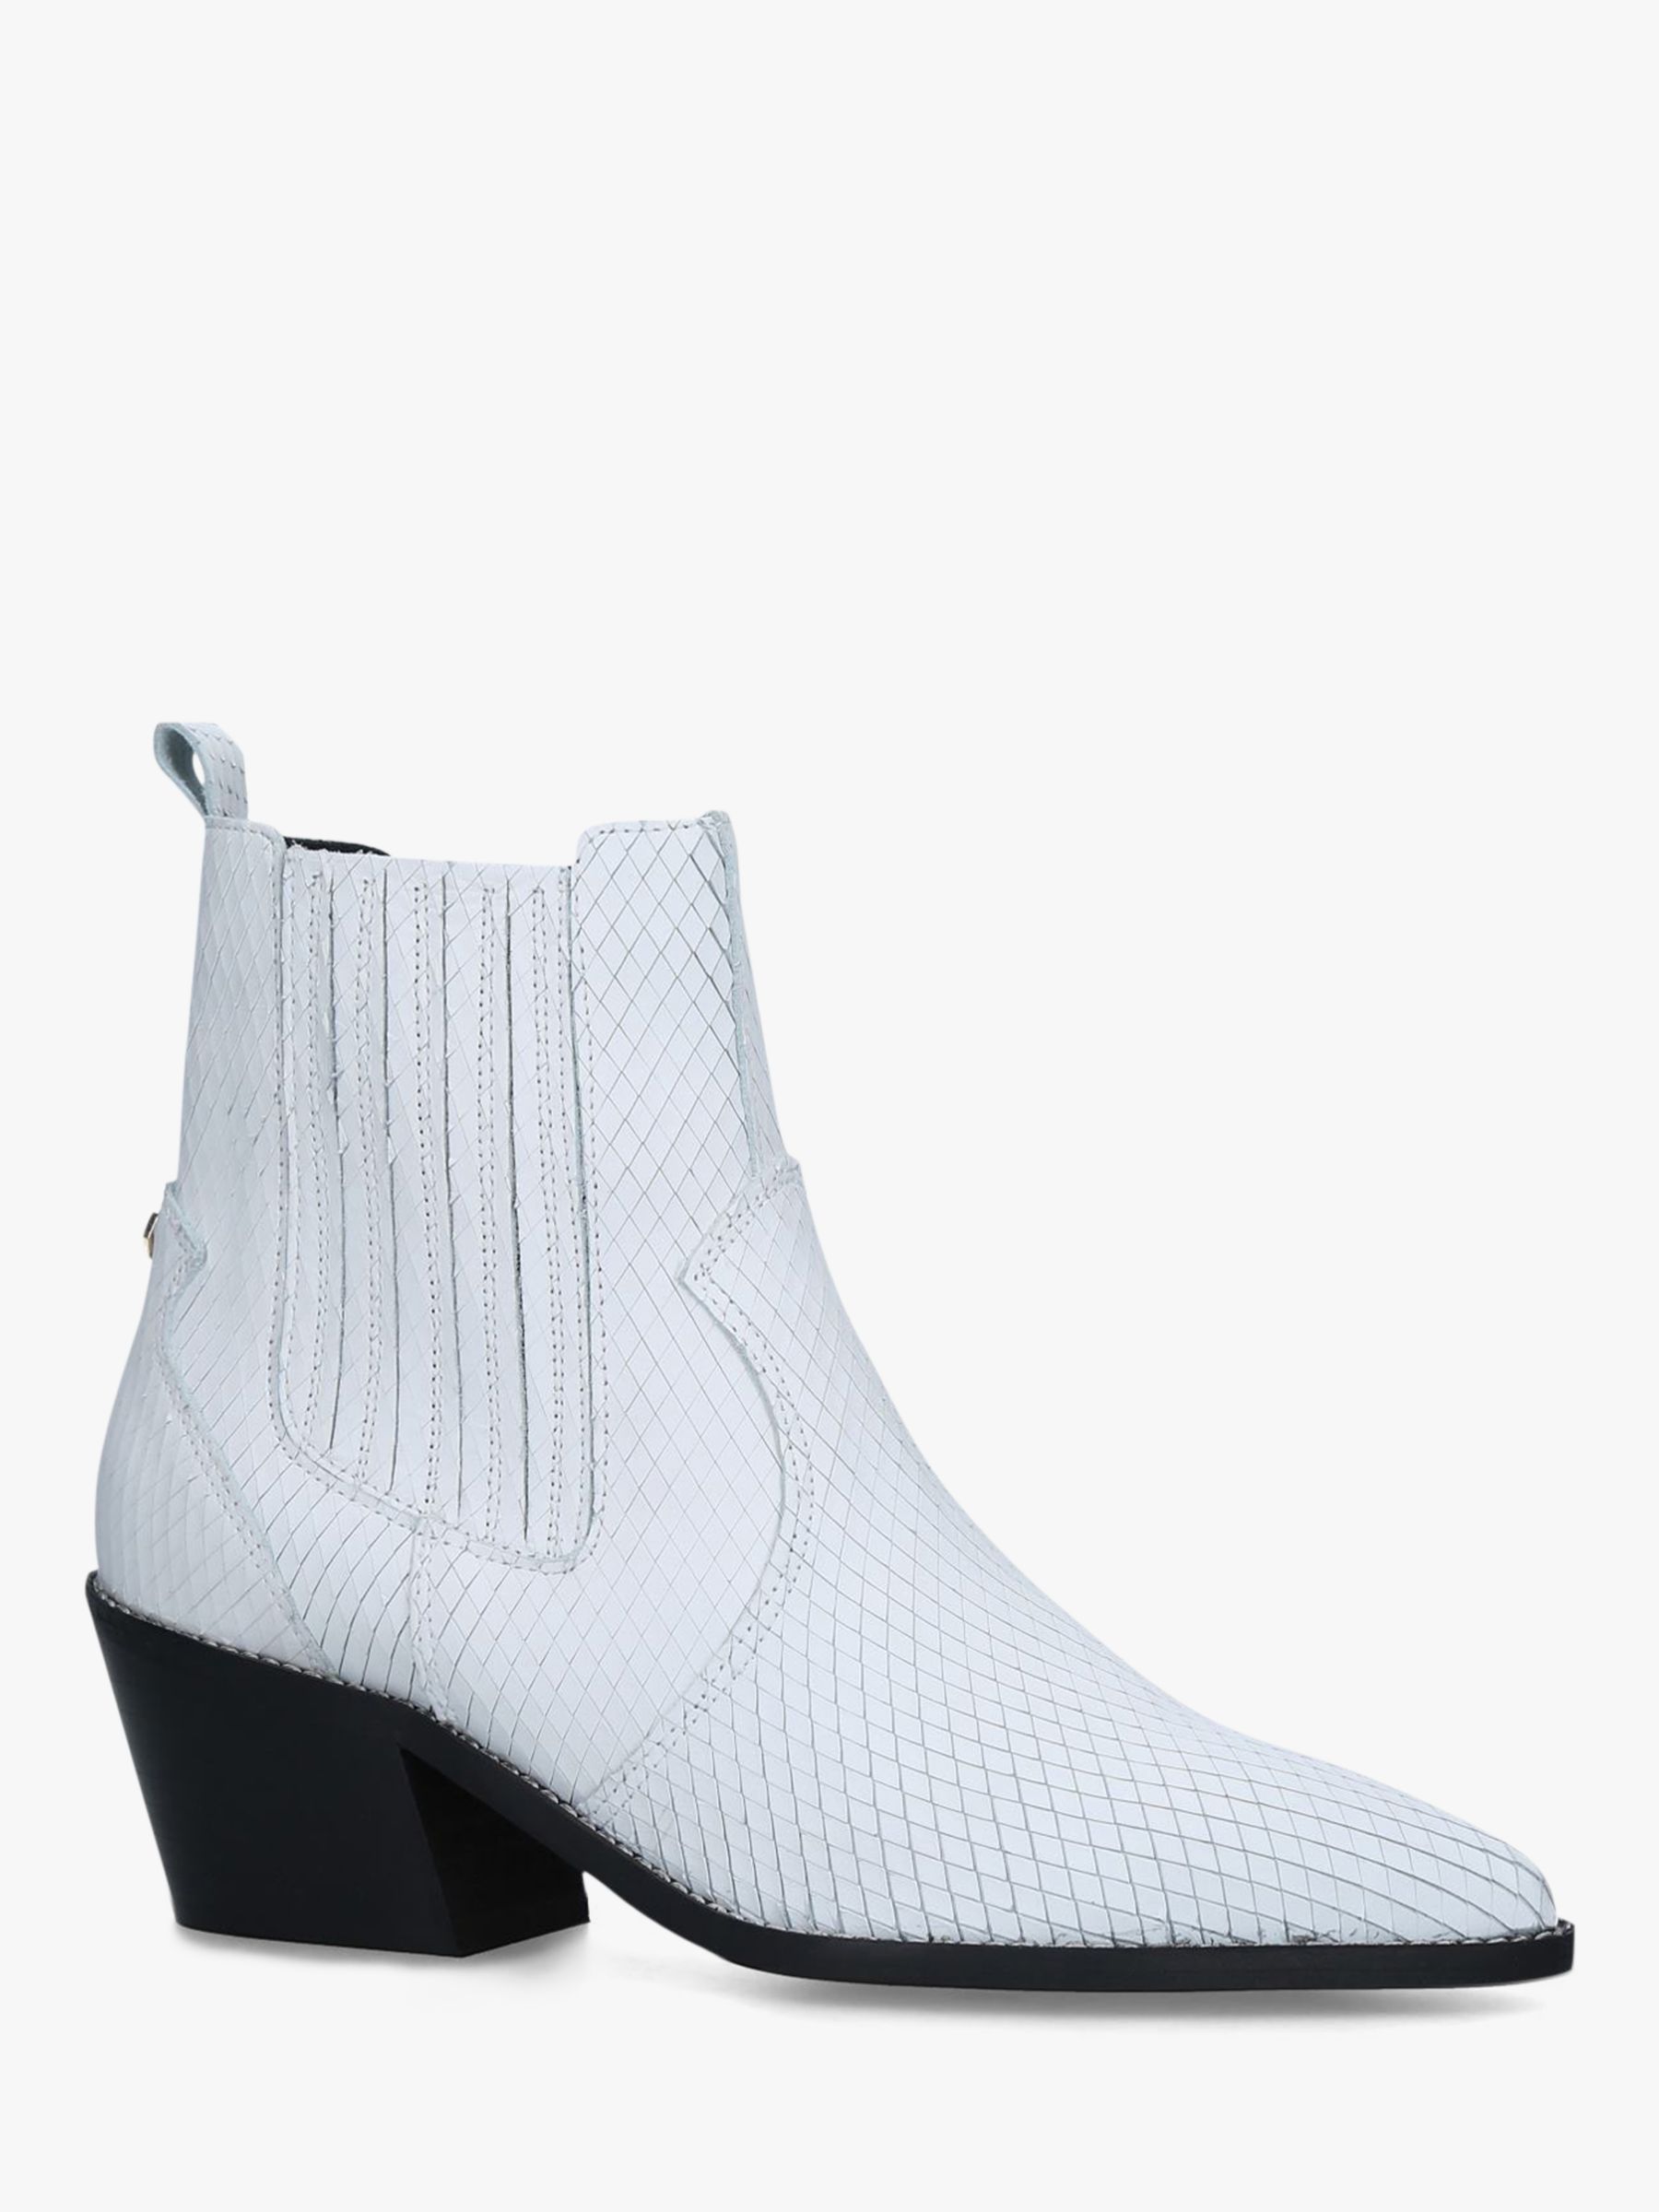 Carvela Stella Leather Western Style Ankle Boots, White at John Lewis ...